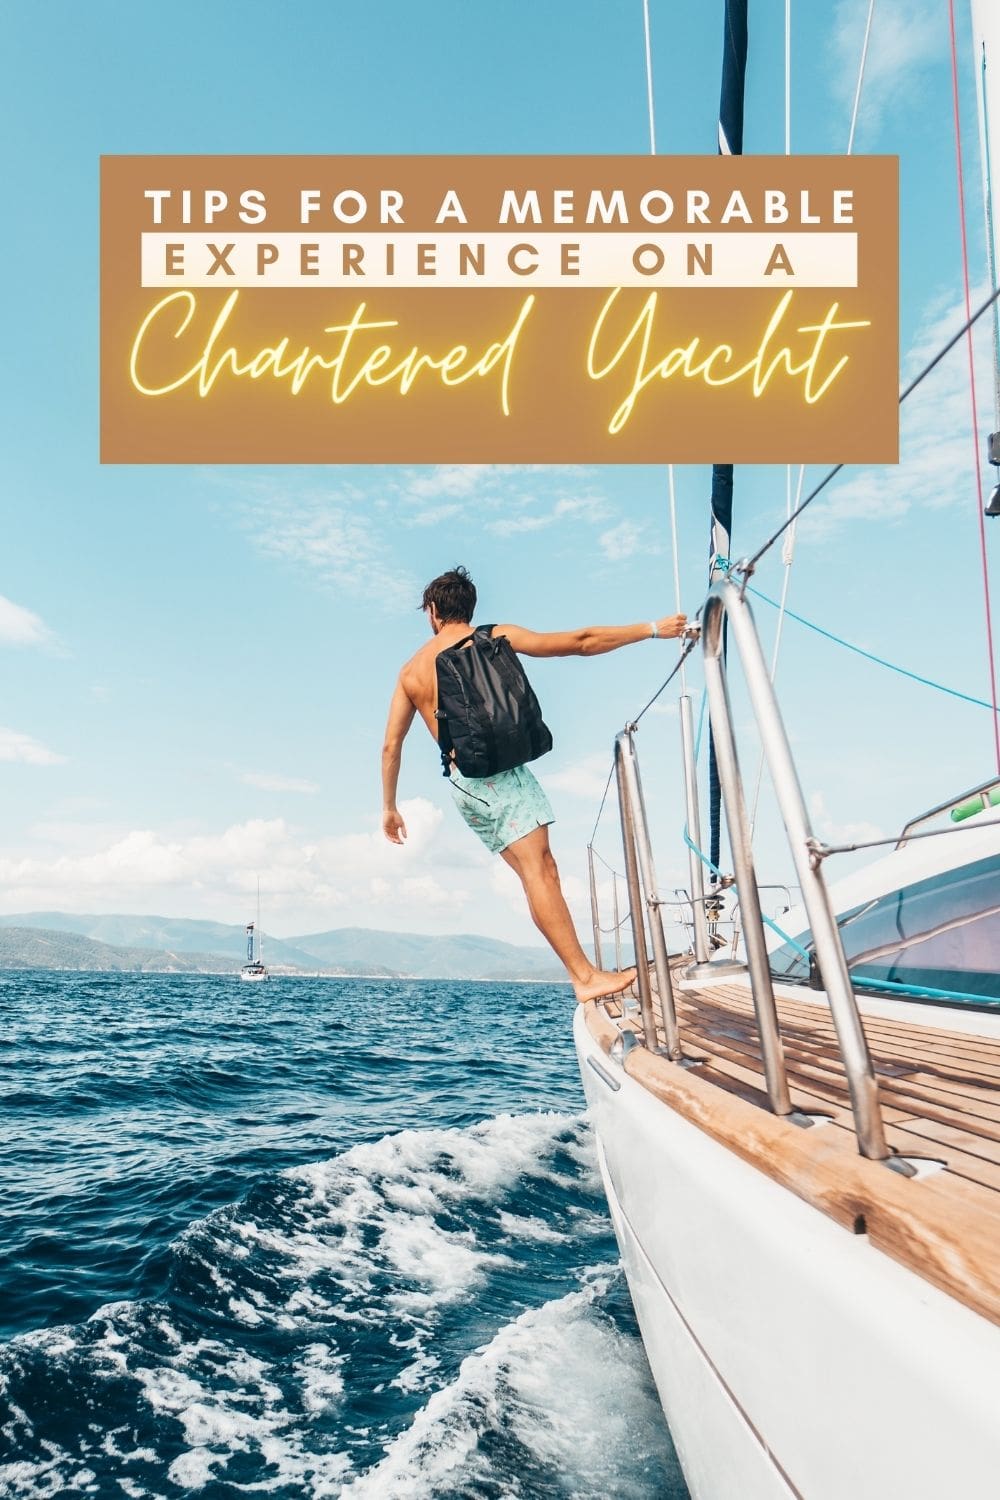 Experience on a Chartered Yacht